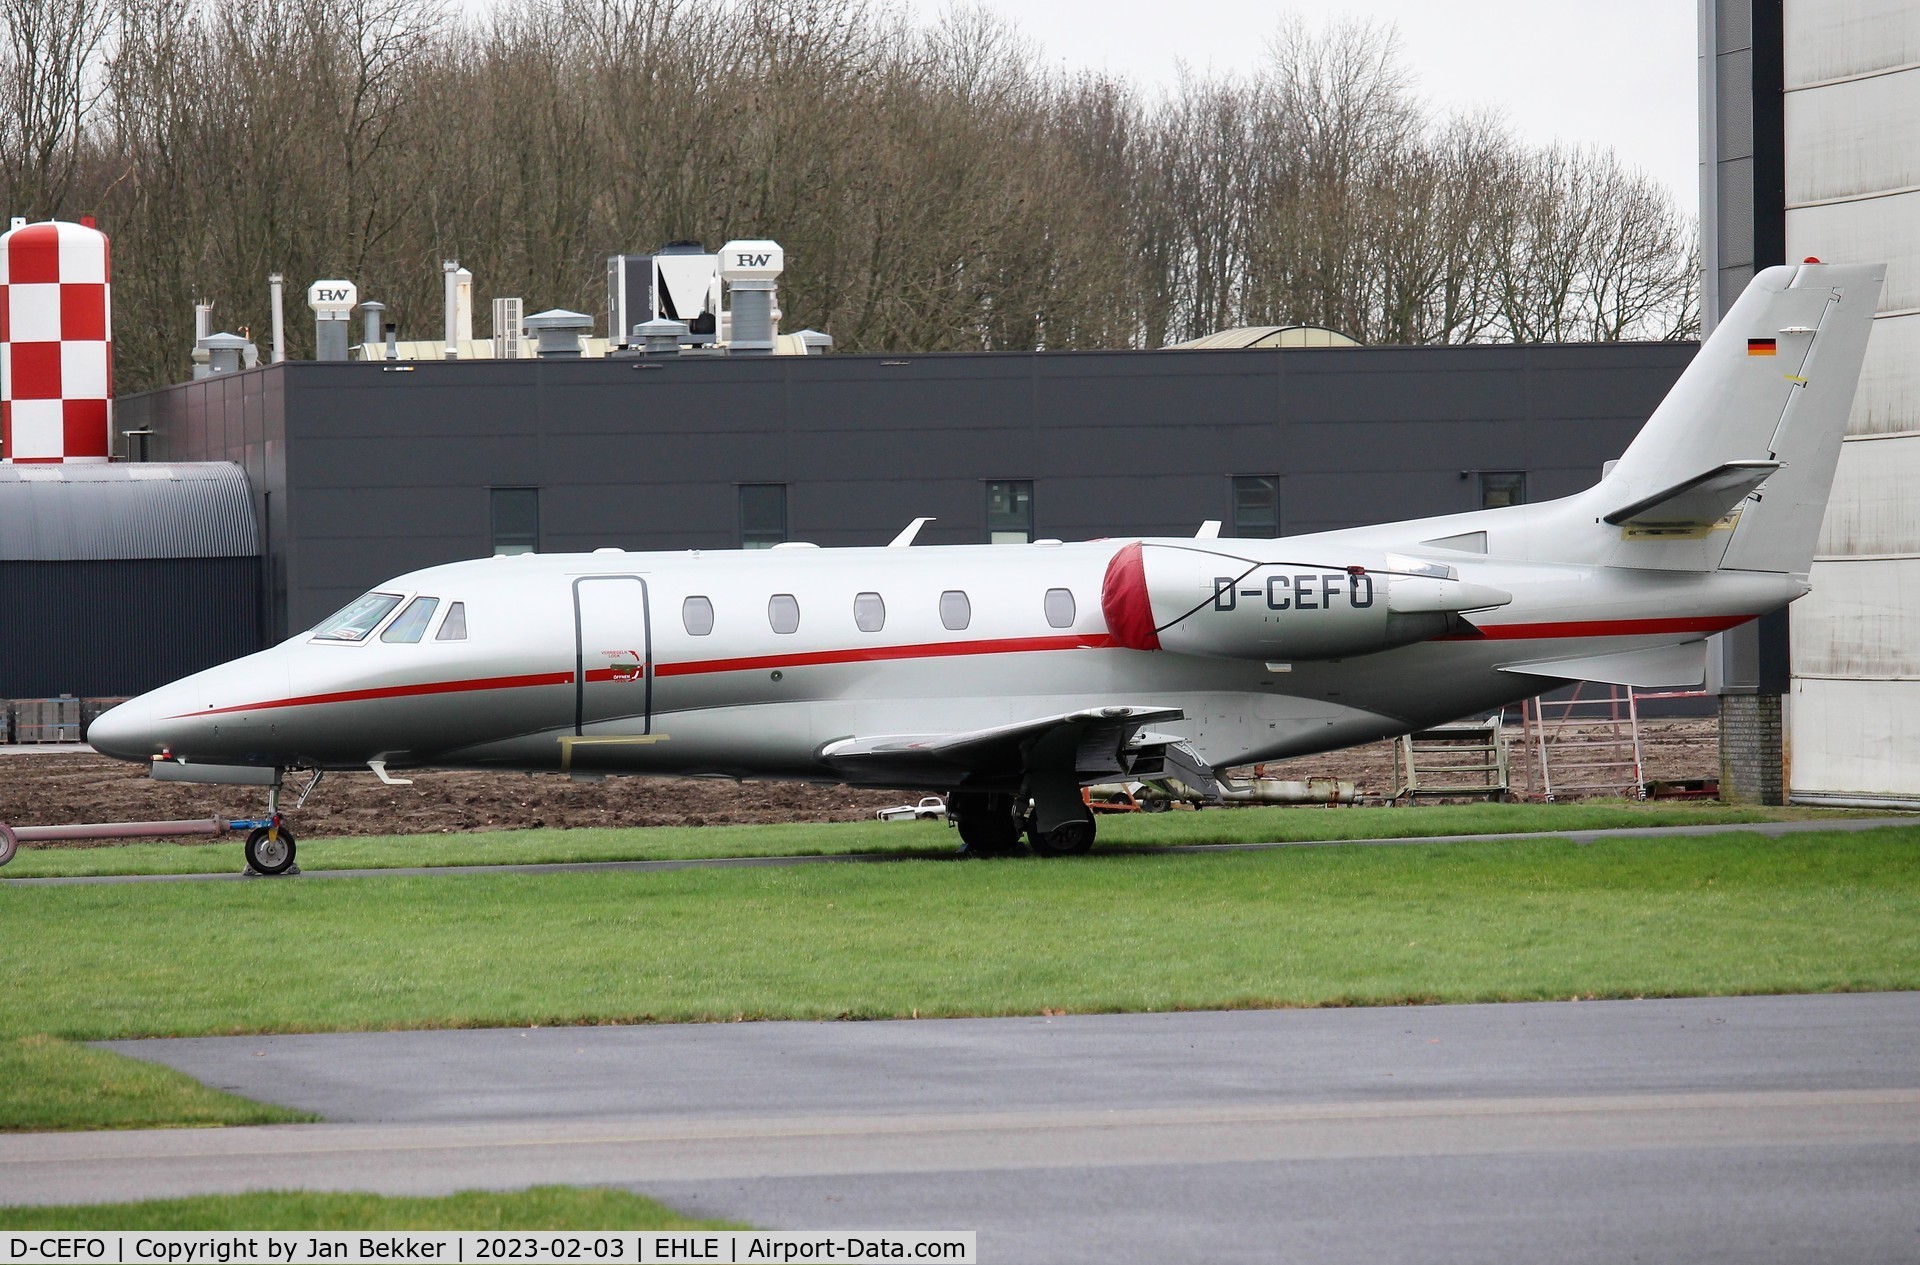 D-CEFO, 2011 Cessna 560XL Citation Excel XLS+ C/N 560-6082, In its new outfit in front of the Satys aircraft paint company